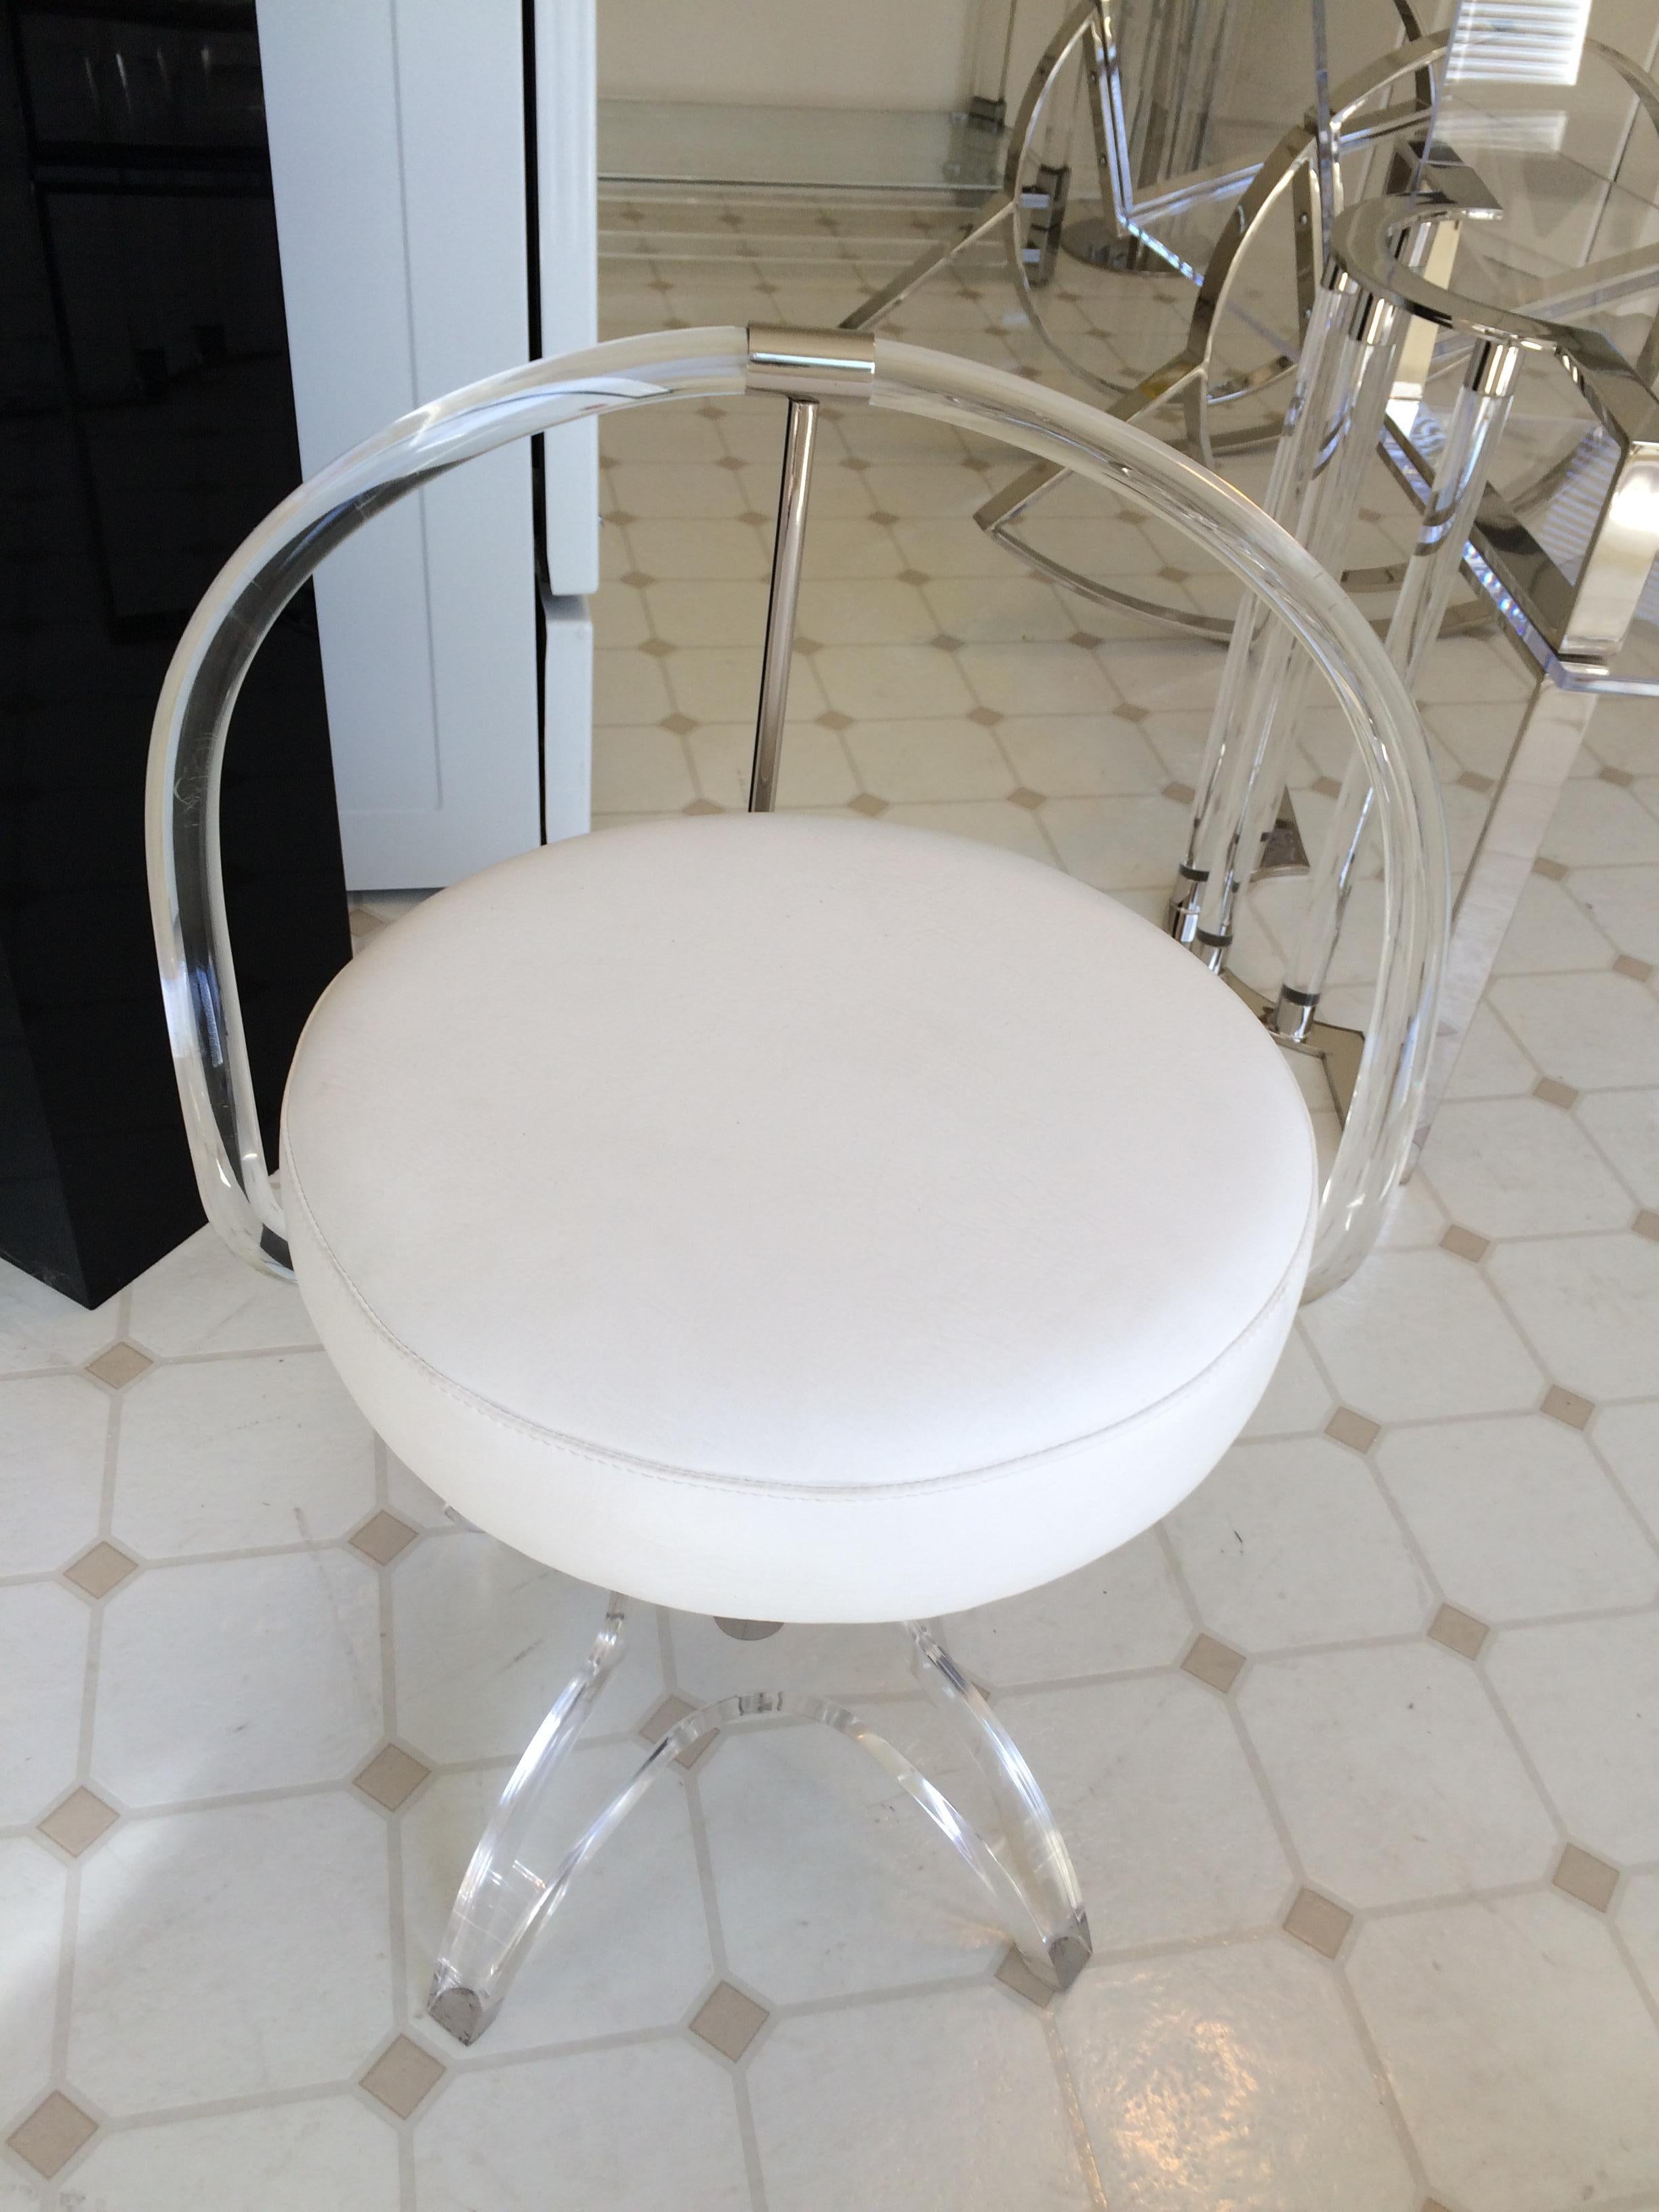 Stunning Lucite and nickel vanity chair designed by Charles Hollis Jones, the original and first design was in brass and commissioned by Lucille Ball, and this is the second edition made in Lucite and nickel and upholstered in white vinyl. The chair